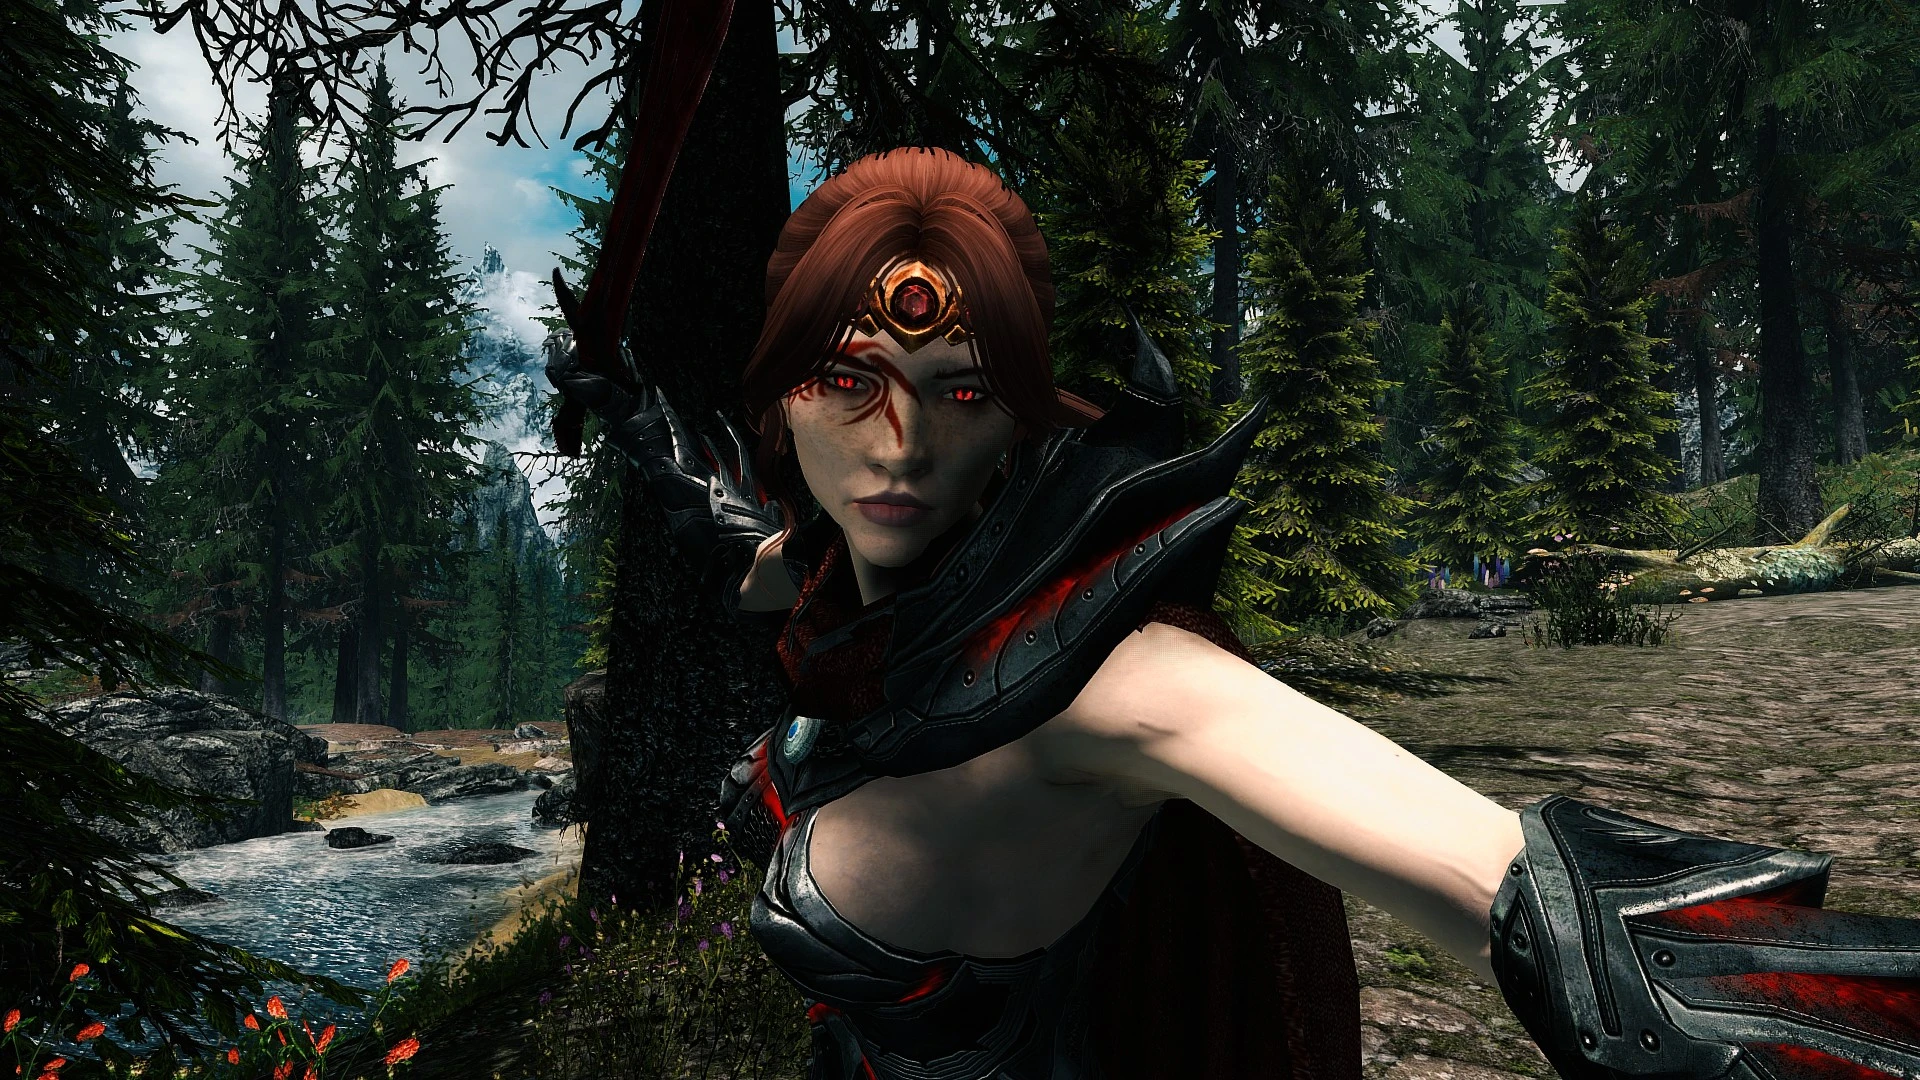 Fangs and Eyes - A Vampire Appearance Mod at Skyrim Special Edition. source...